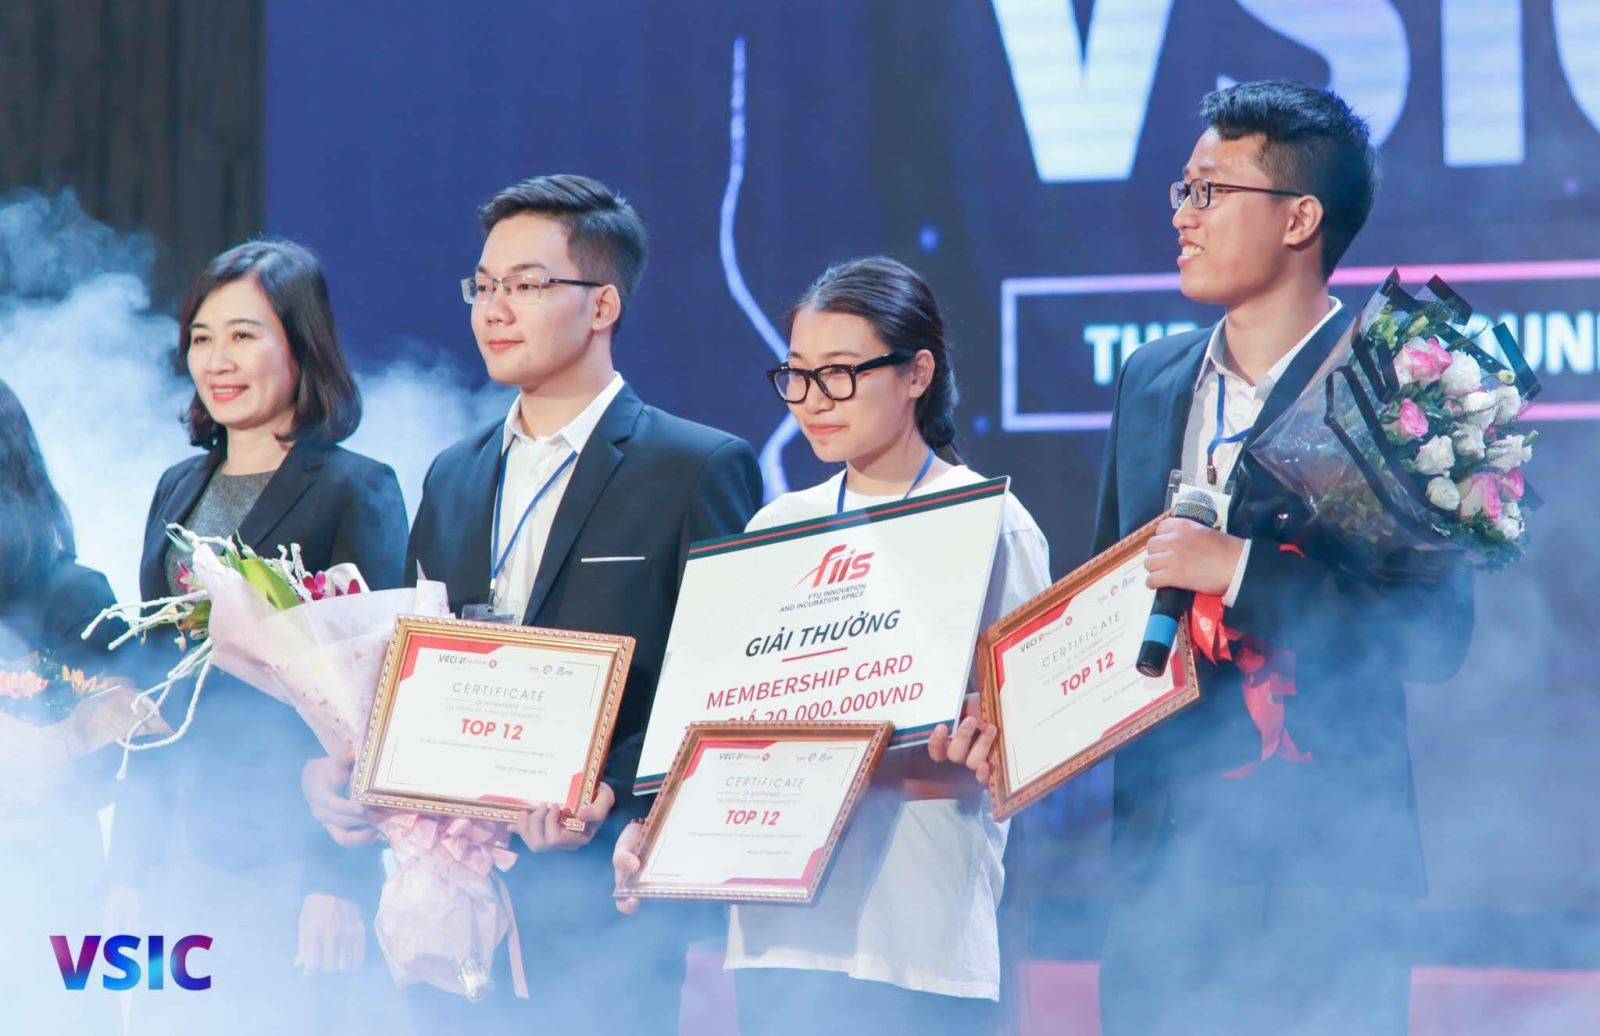 Nguyen Sieu student named among 55 Startuppers of the year by Total Challenge